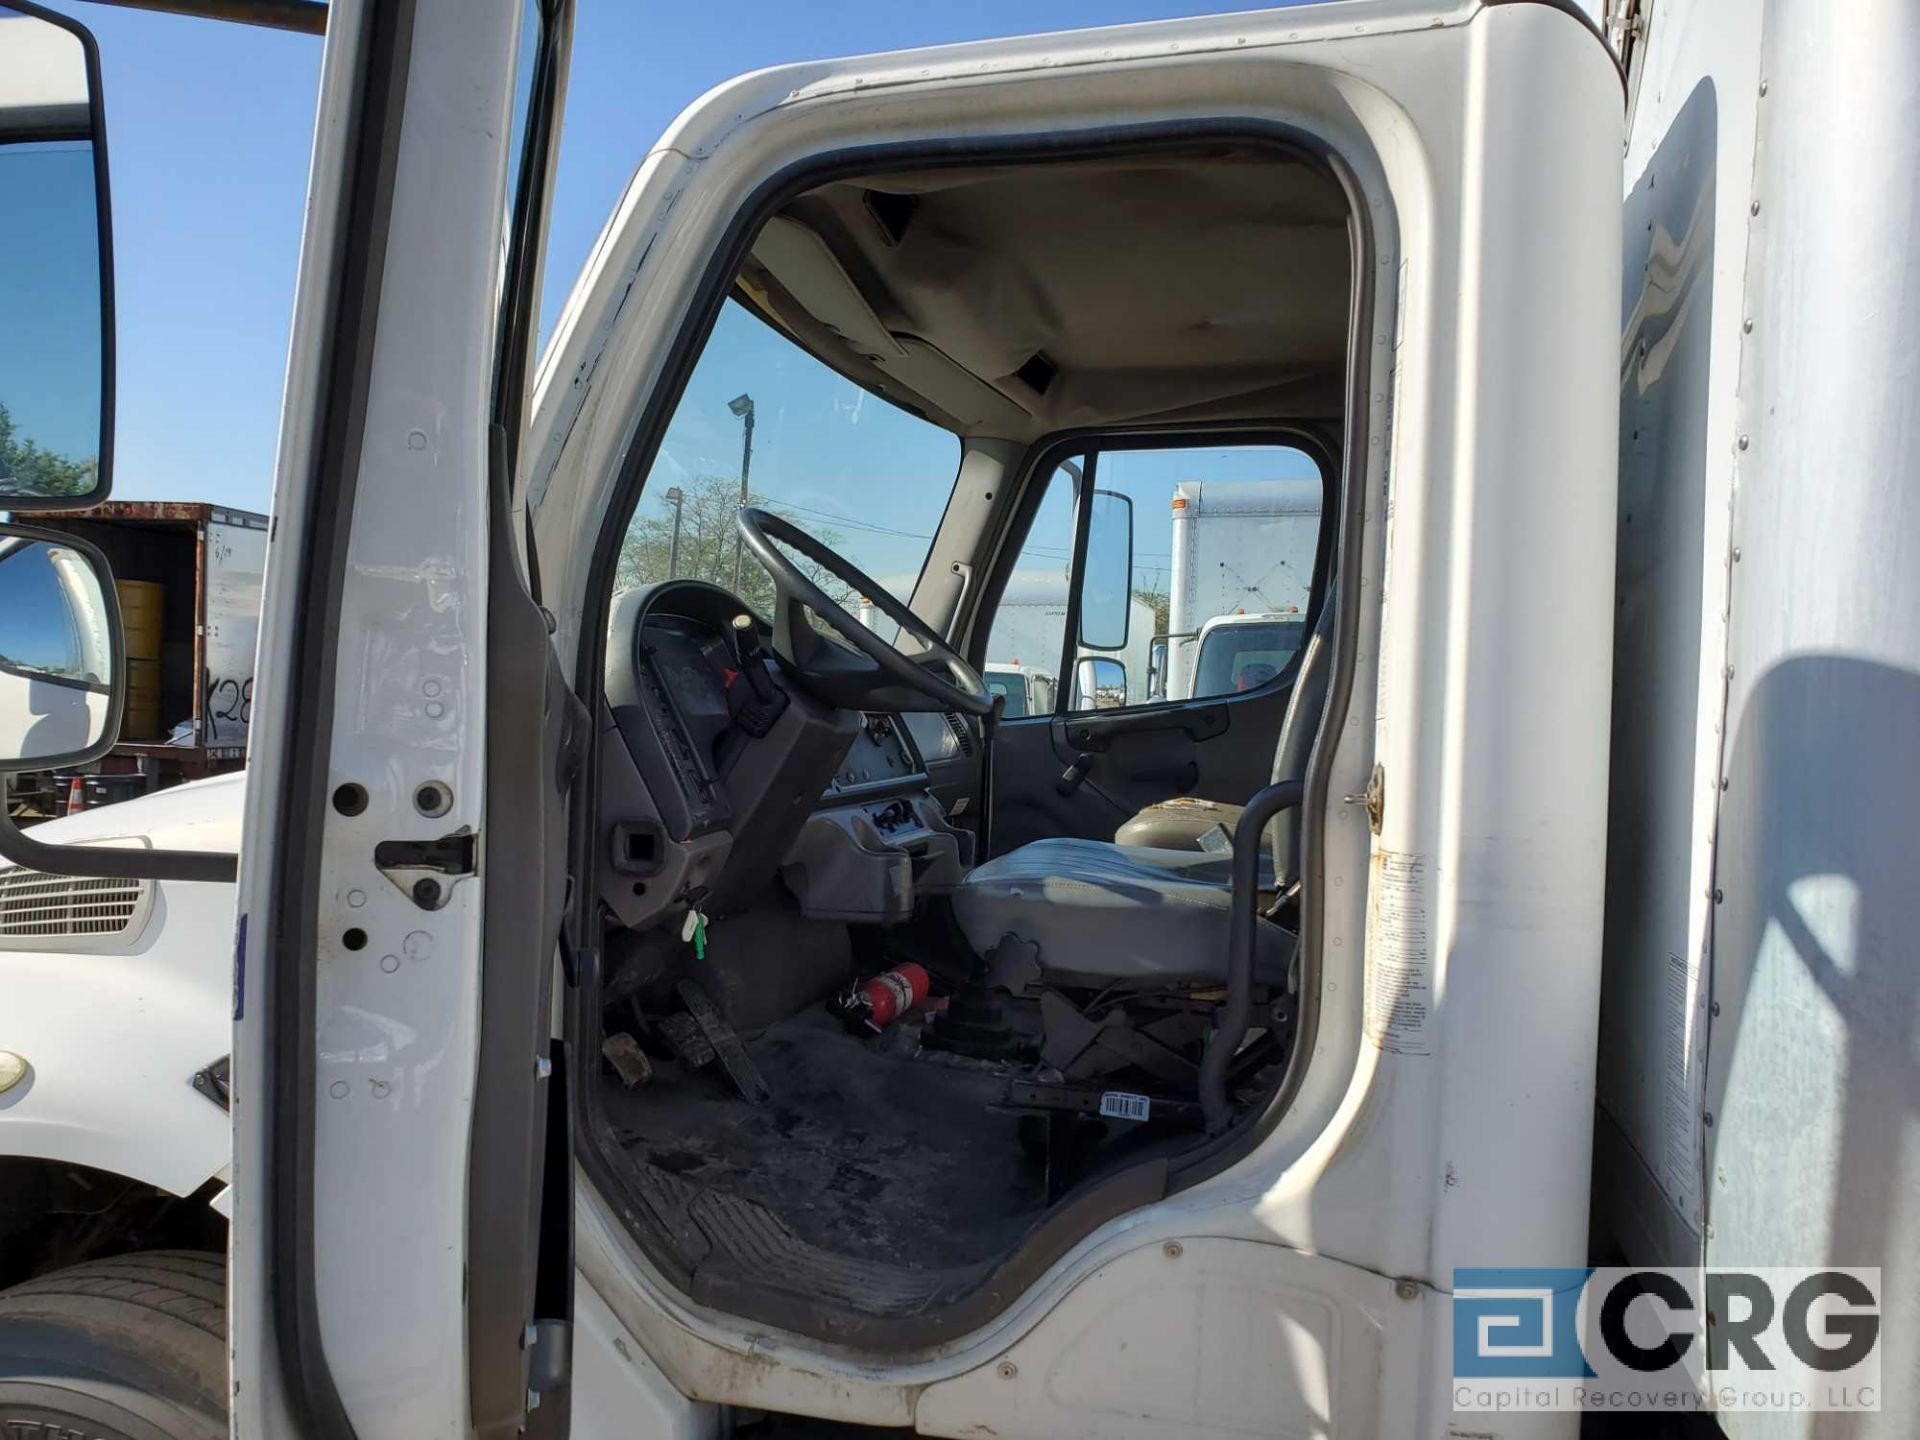 2004 Freightliner Business Class M2 Box Truck w/ Waltco lift gate, 33,000 GVWR, 14,375 hours, with - Image 8 of 8